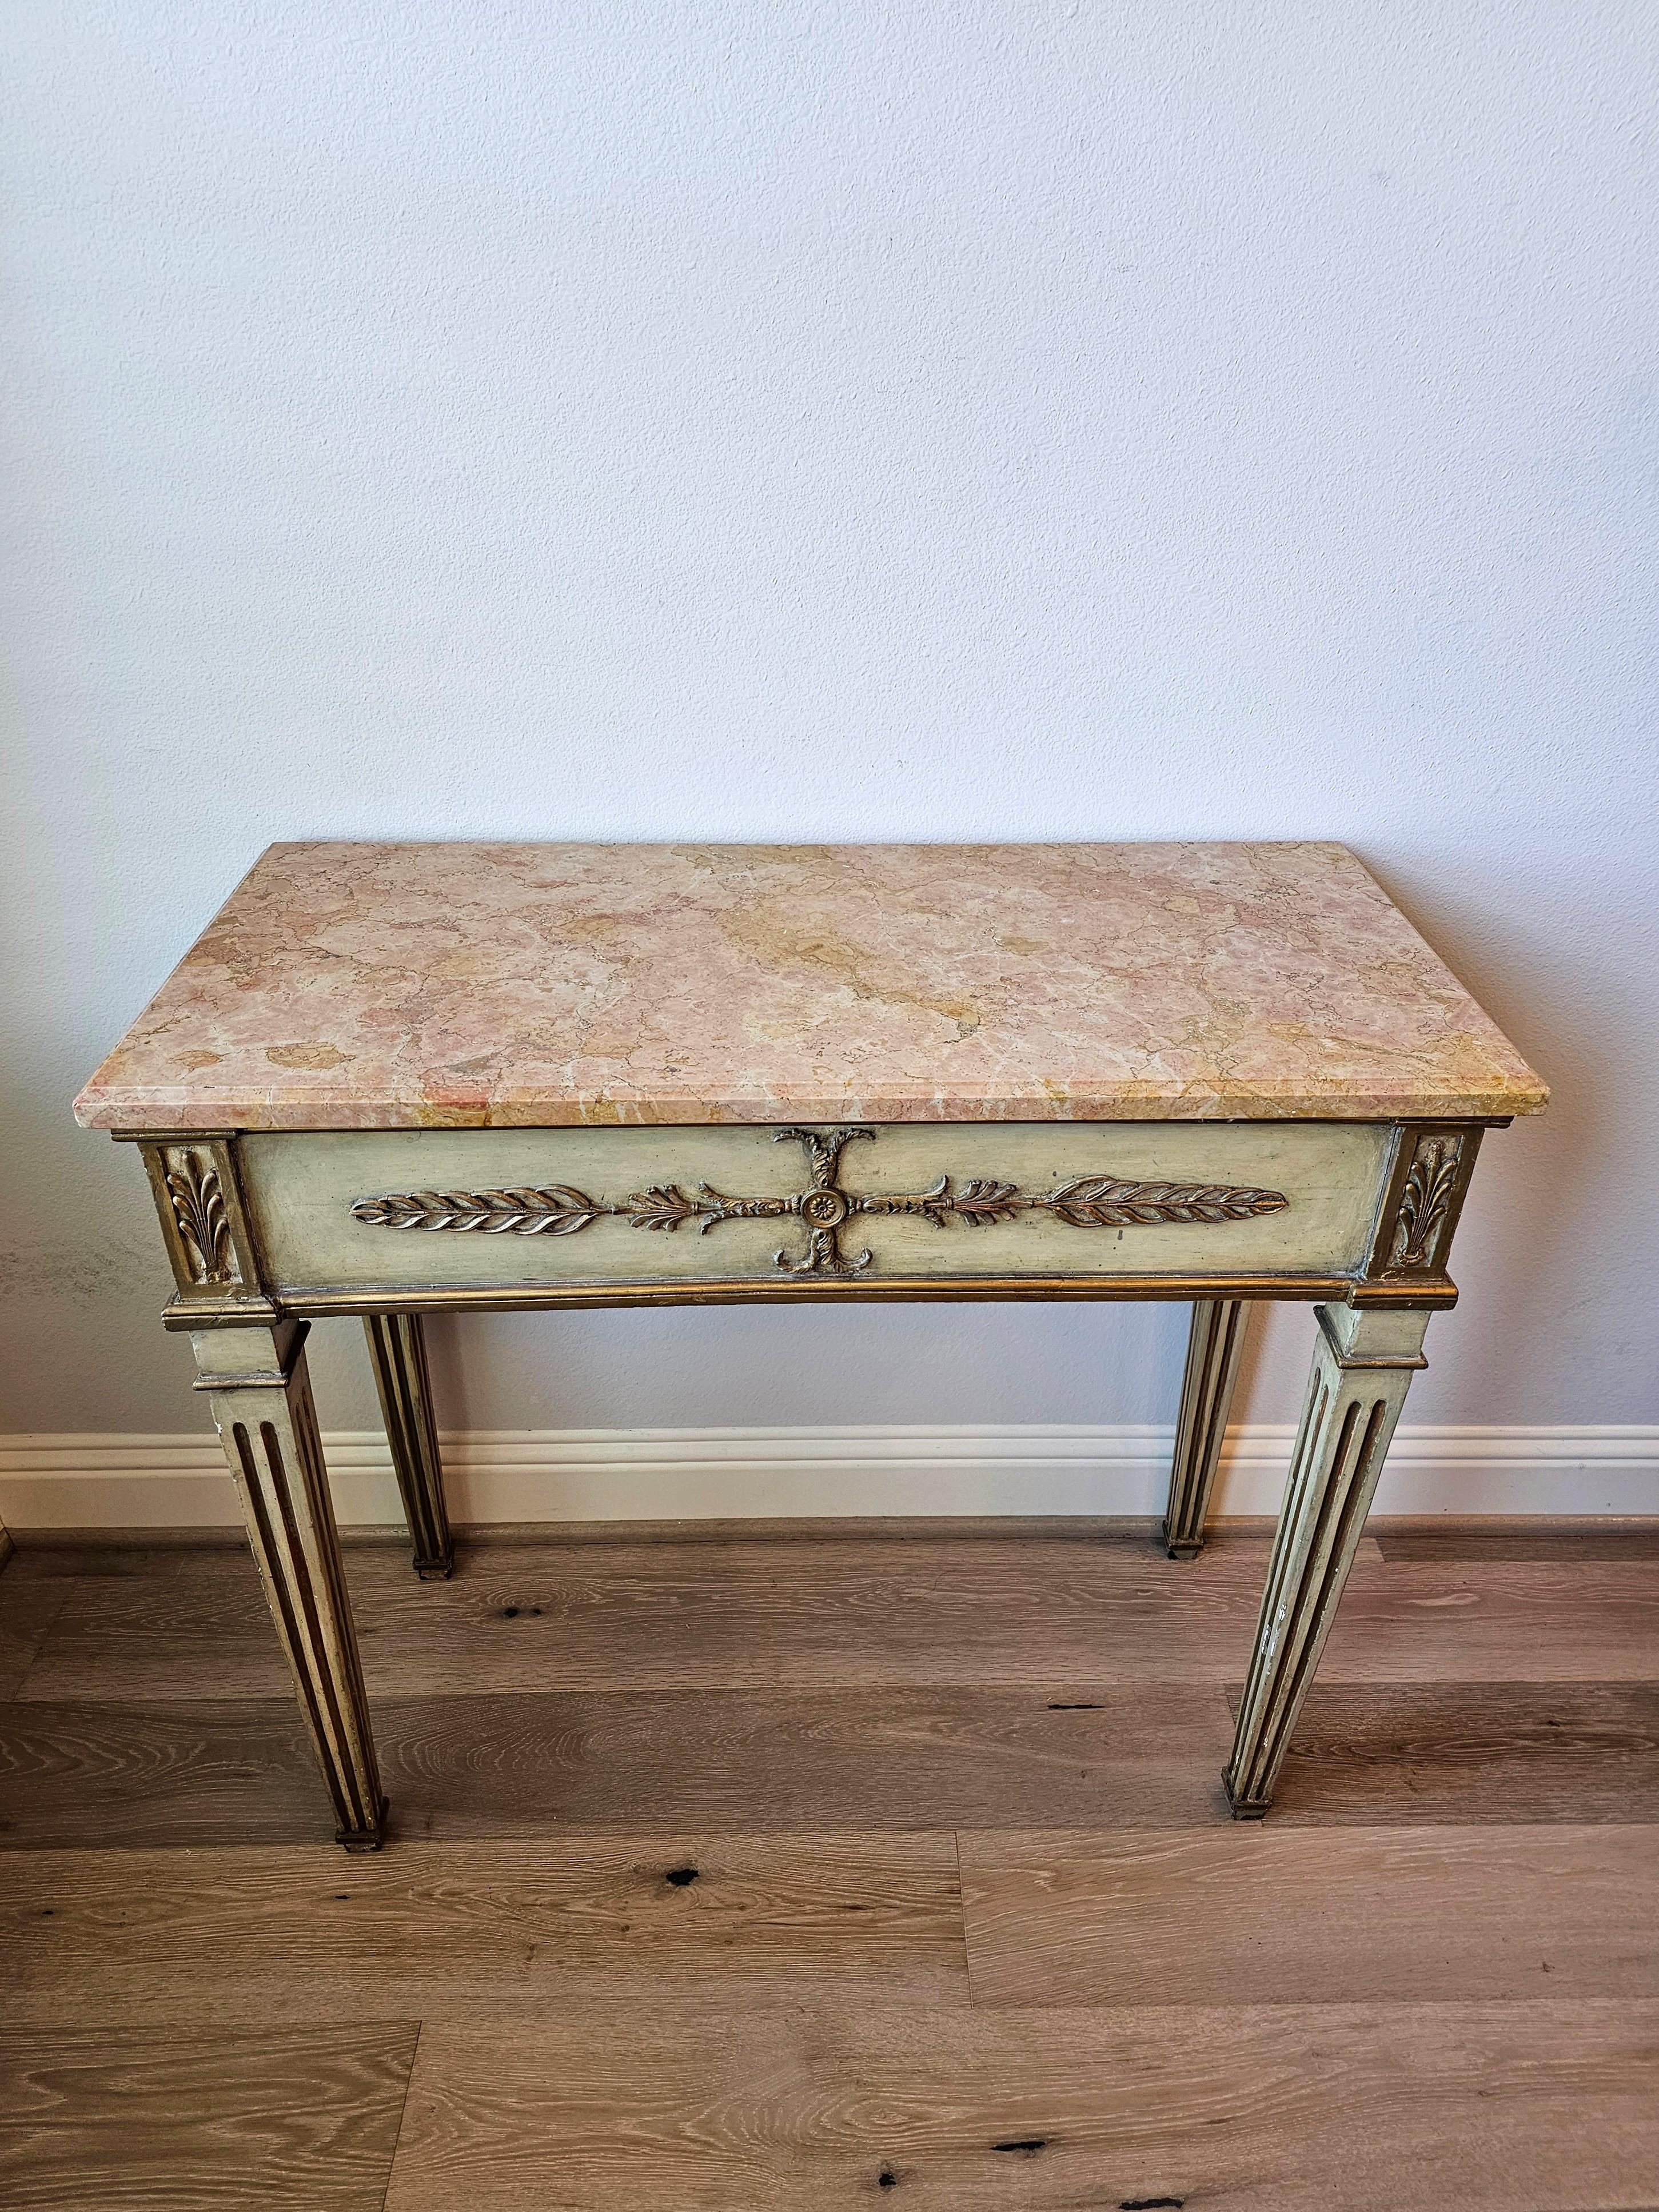 A stunning Swedish Gustavian period (1772-1809) console table.
 
Hand-crafted in Sweden in the early 19th century, Louis XVI Neo-classical taste, the muted dark cream with pale greenish undertone painted pine frame finely decorated with gilt gold